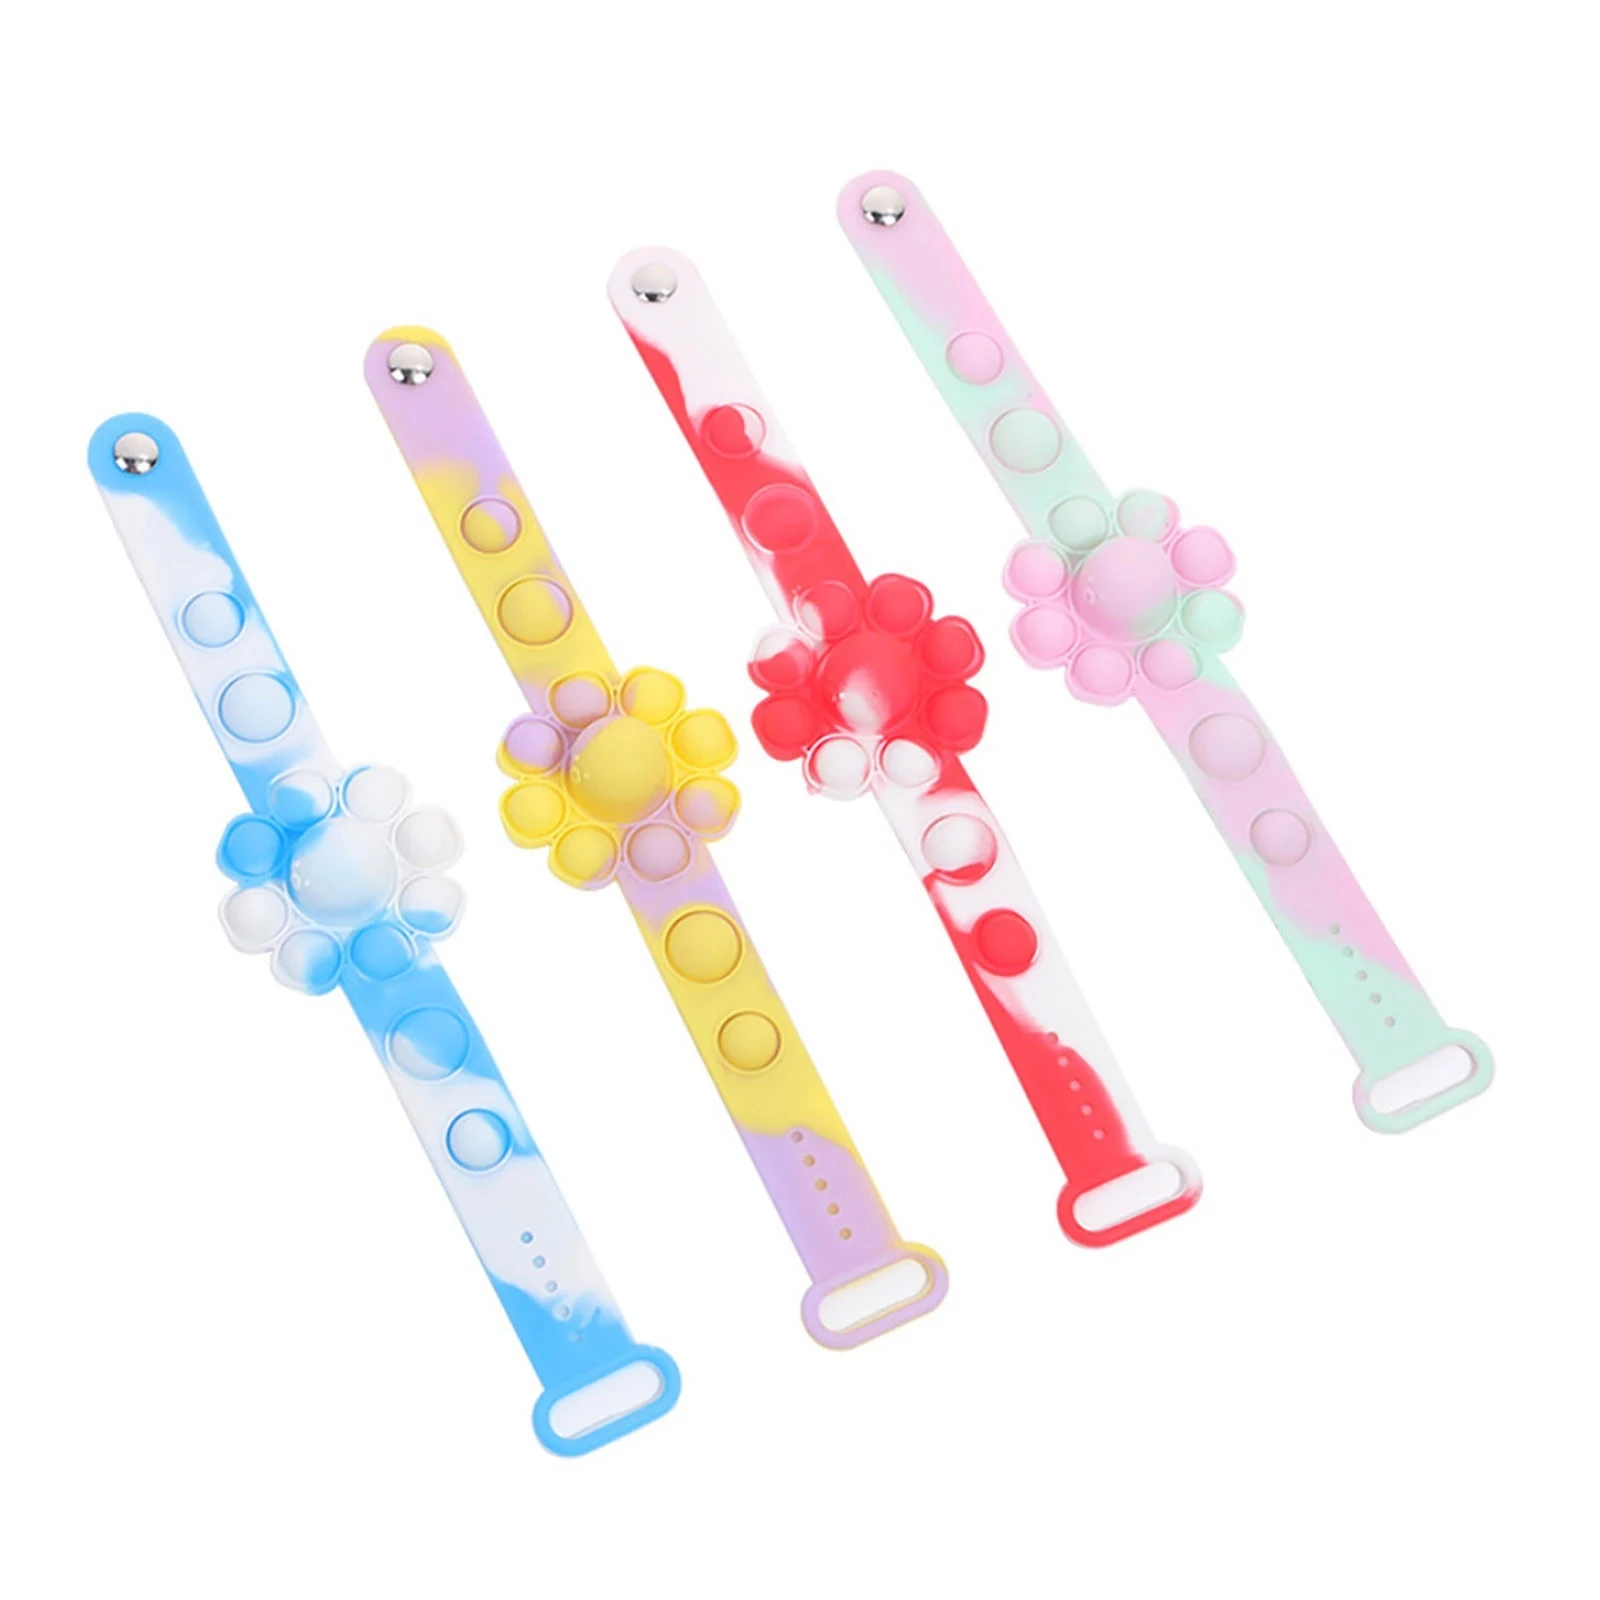 

New Fidget Toys For Children Pops Its Push Bubble Dimple Bracelet Decompression Toy Adults Anti Stress Reliever Sensory Toy Gift